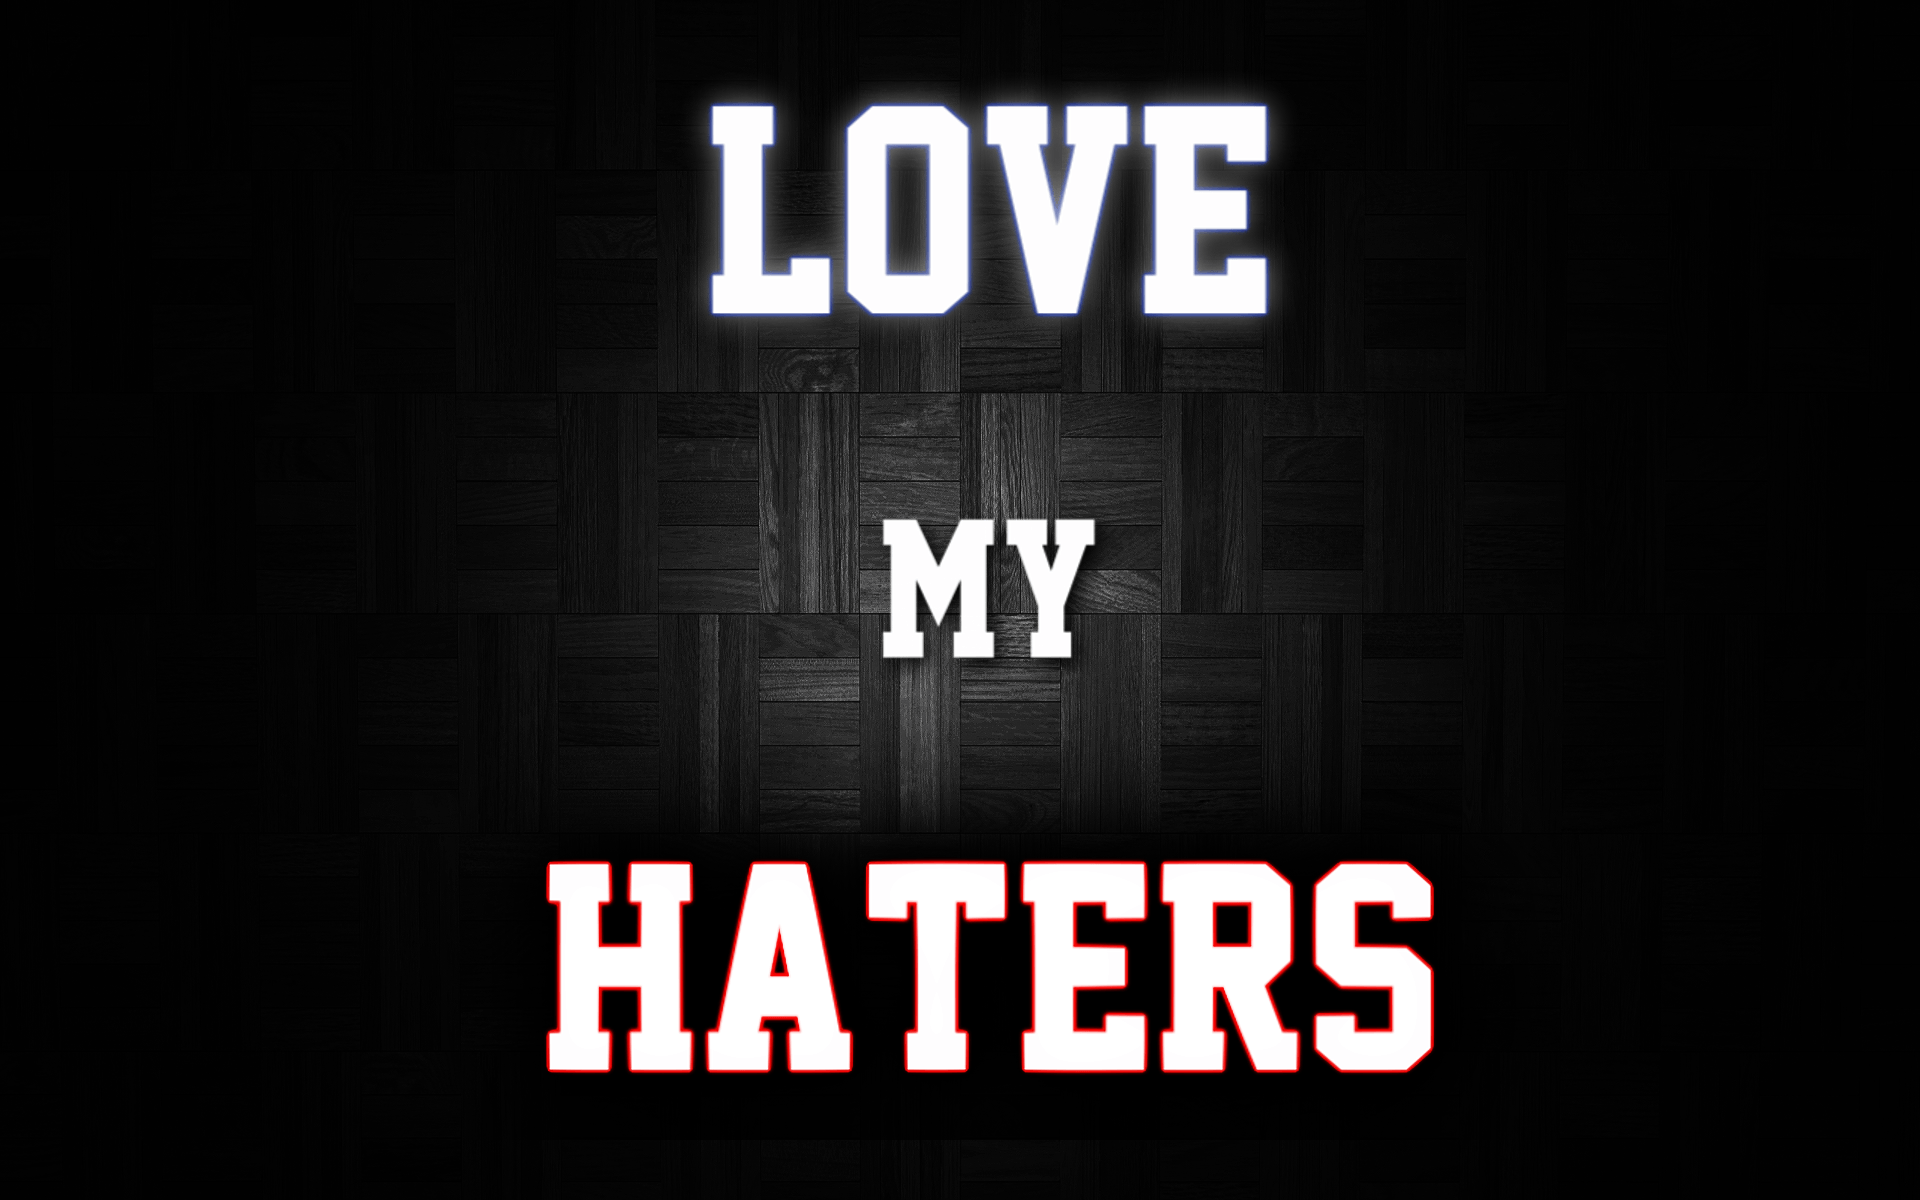 I Love My Haters Background. I Love My Haters Wallpaper, Haters I Hate Wallpaper and Haters Gonna Hate Wallpaper